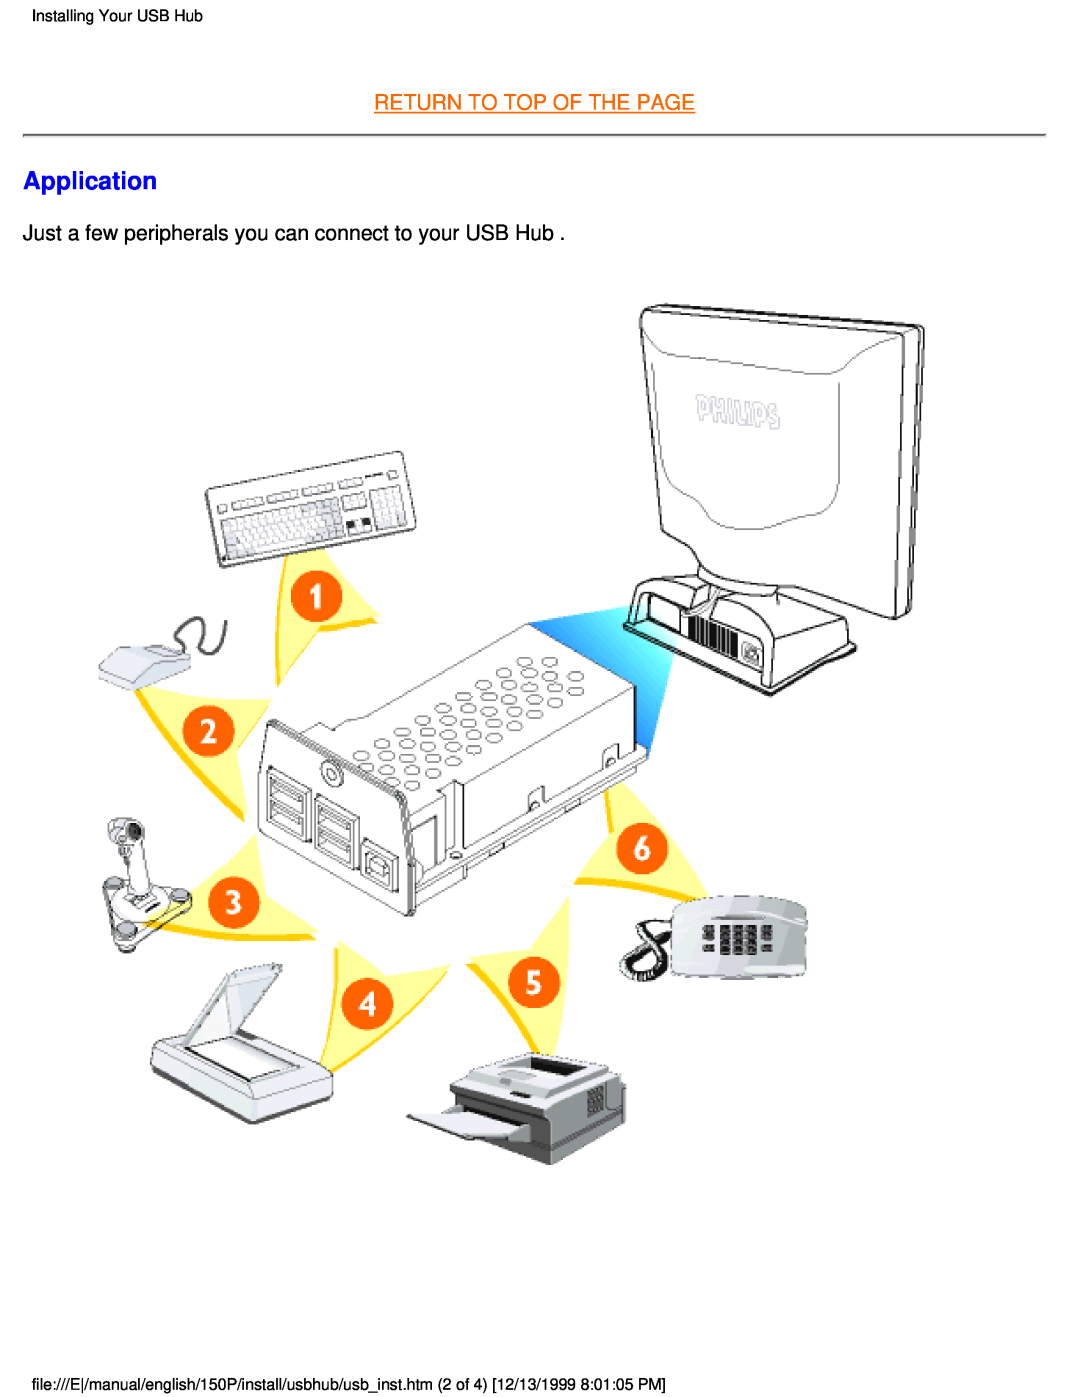 Philips 150P user manual Application, Return To Top Of The Page, Just a few peripherals you can connect to your USB Hub 